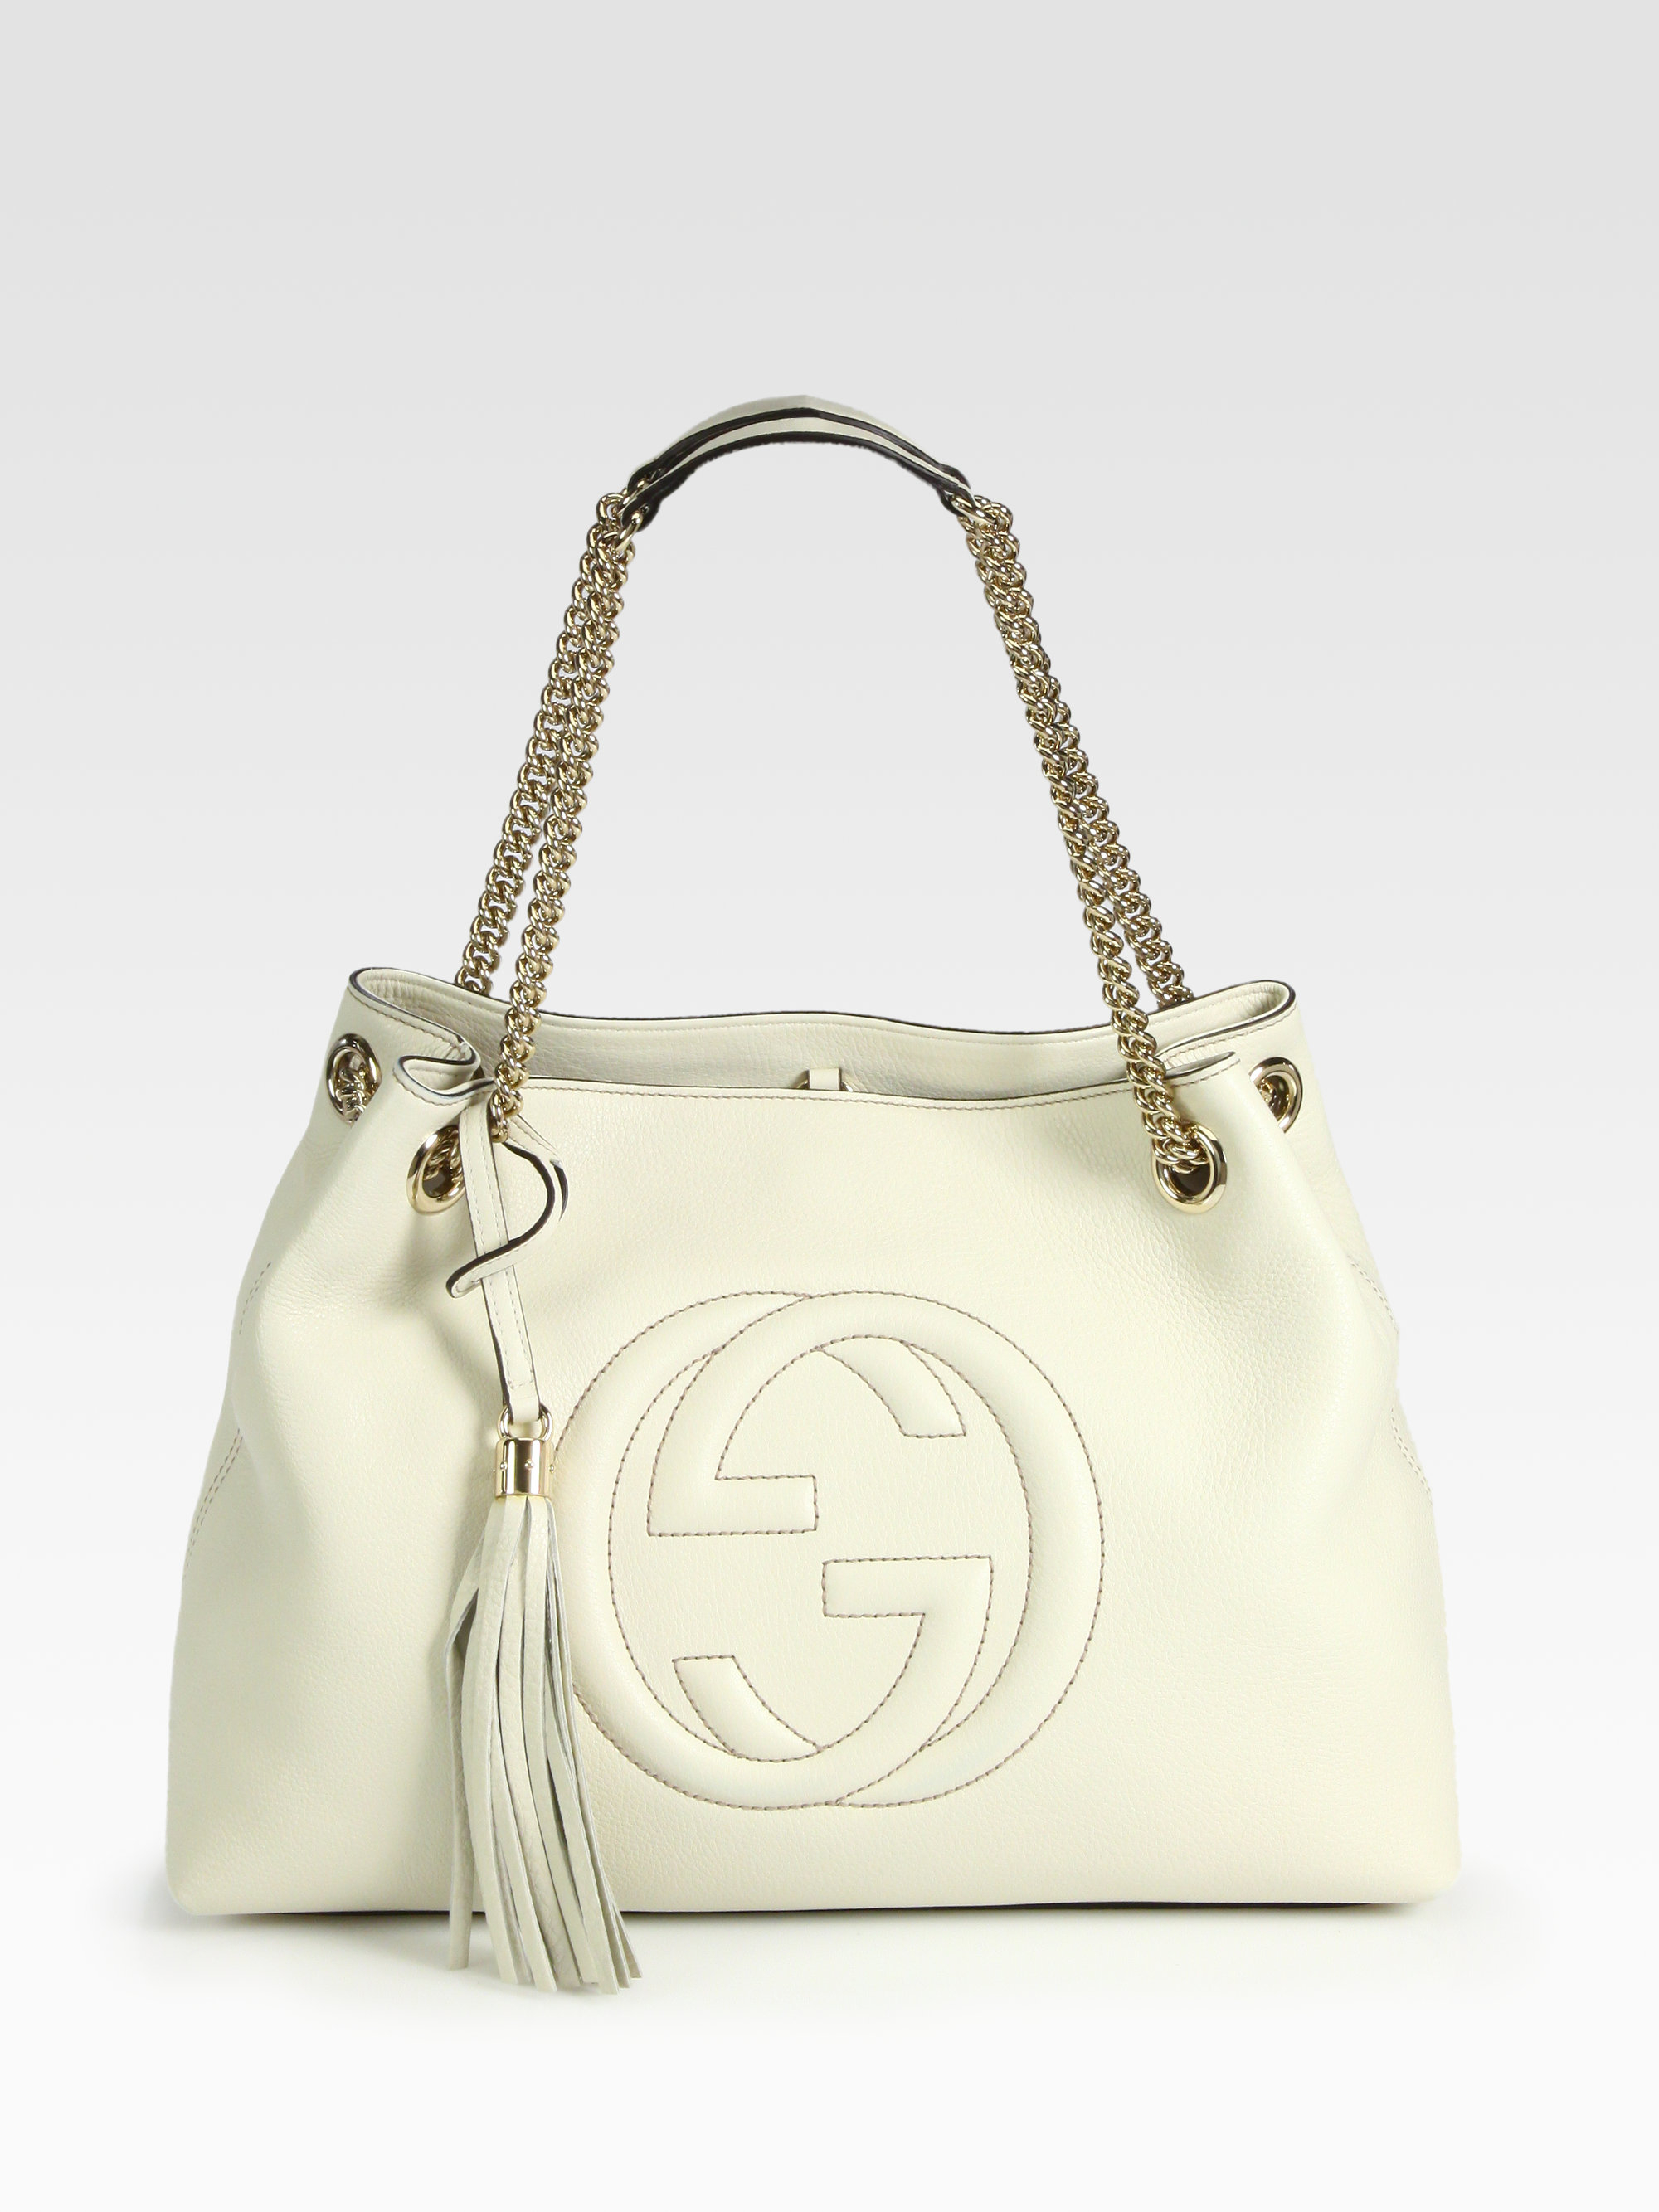 Gucci Soho Leather Shoulder Bag in White - Lyst